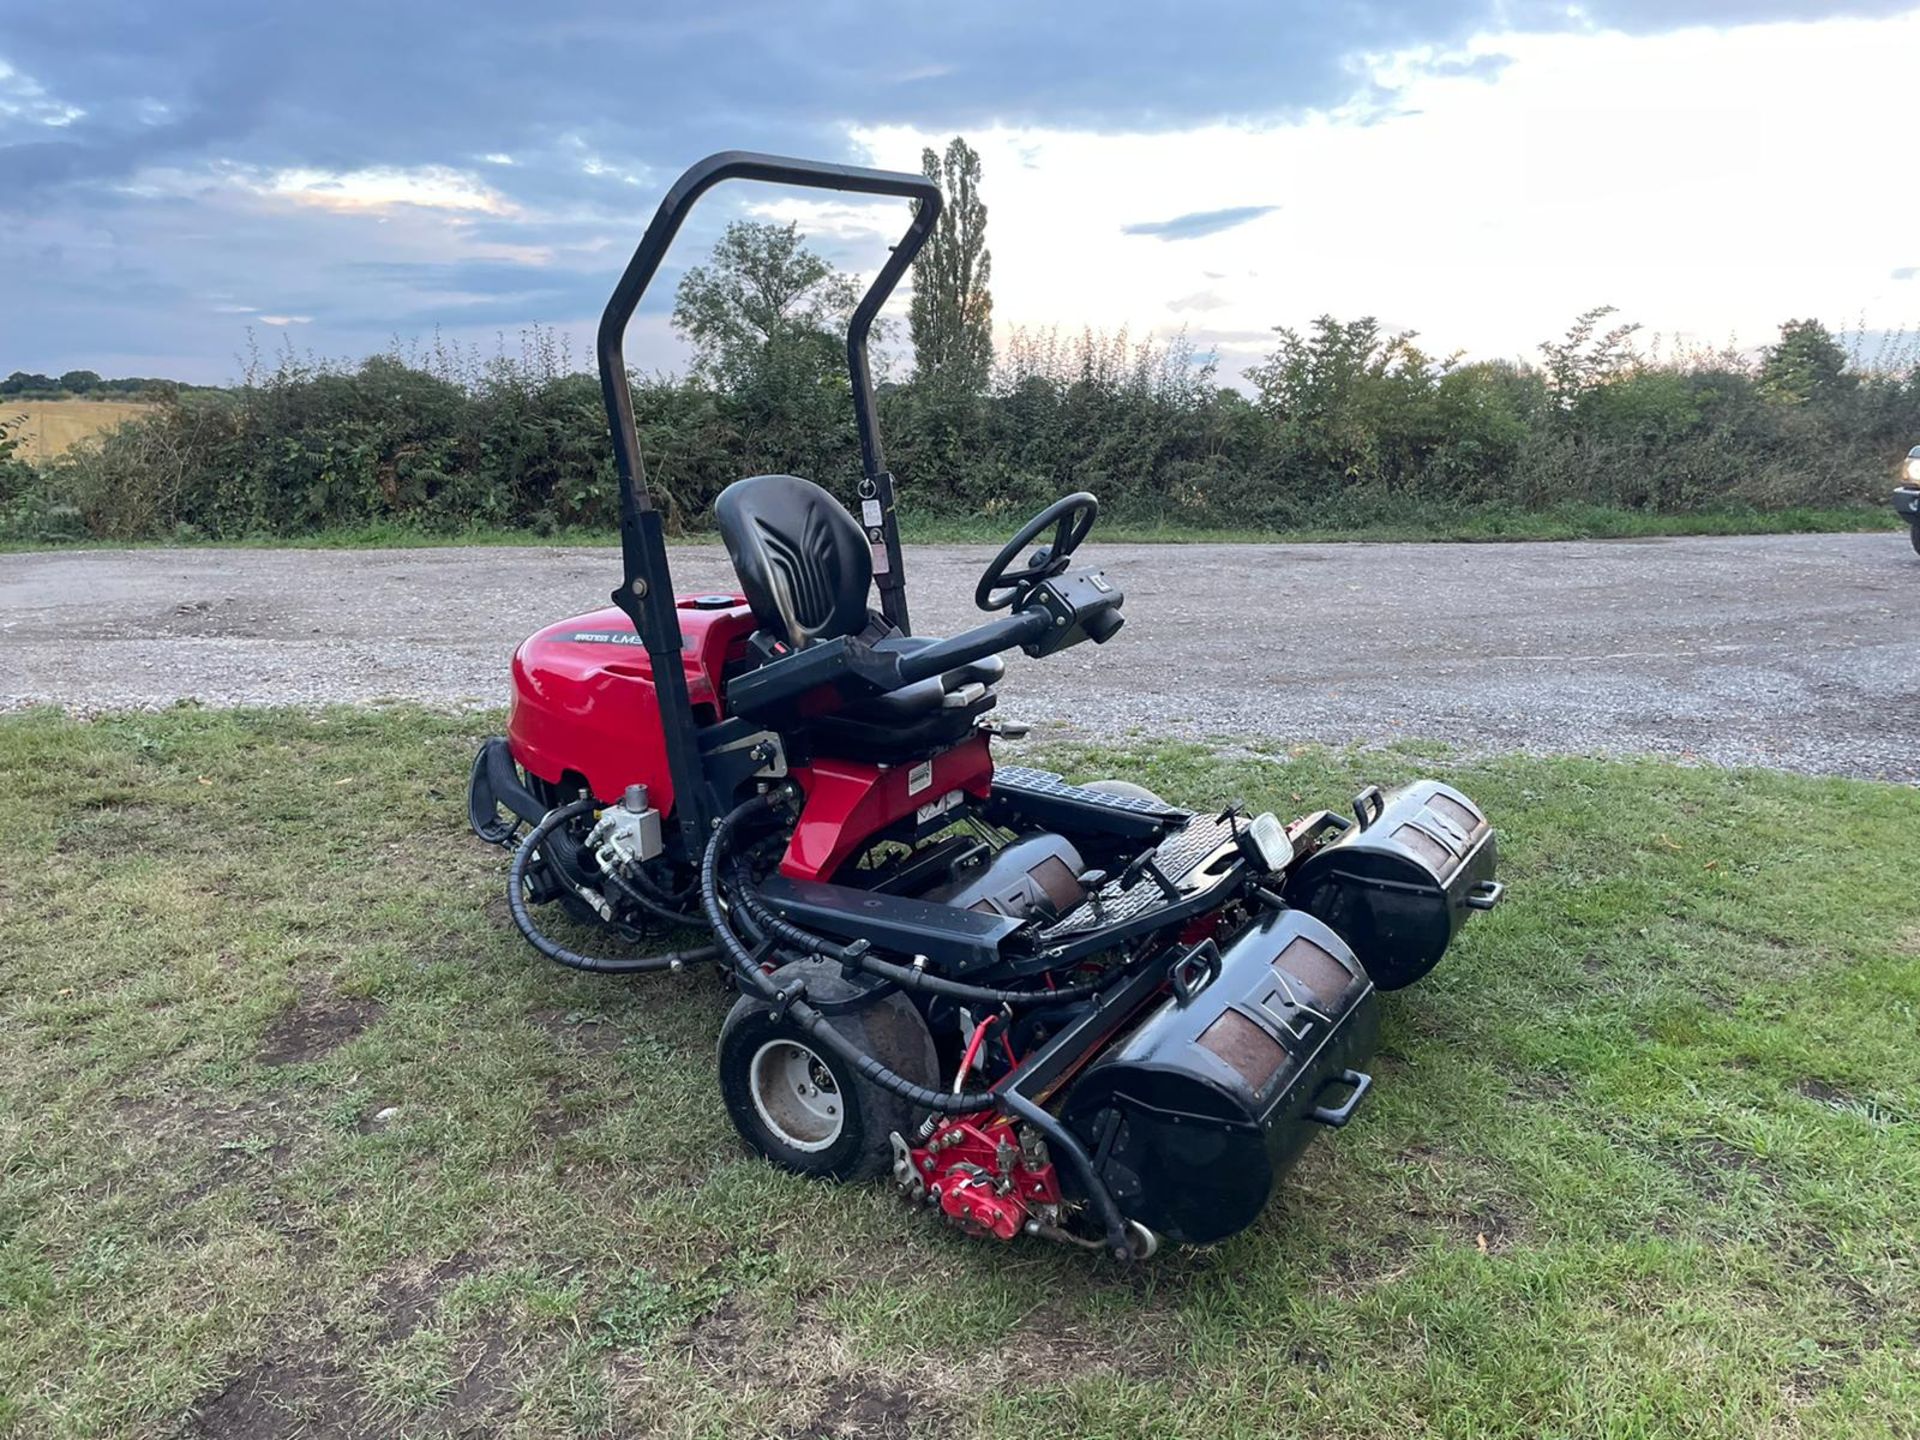 2014 BARONESS LM315GC 3WD CYLINDER MOWER WITH GRASS BOXES, RUNS DRIVES CUTS AND COLLECTS WELL